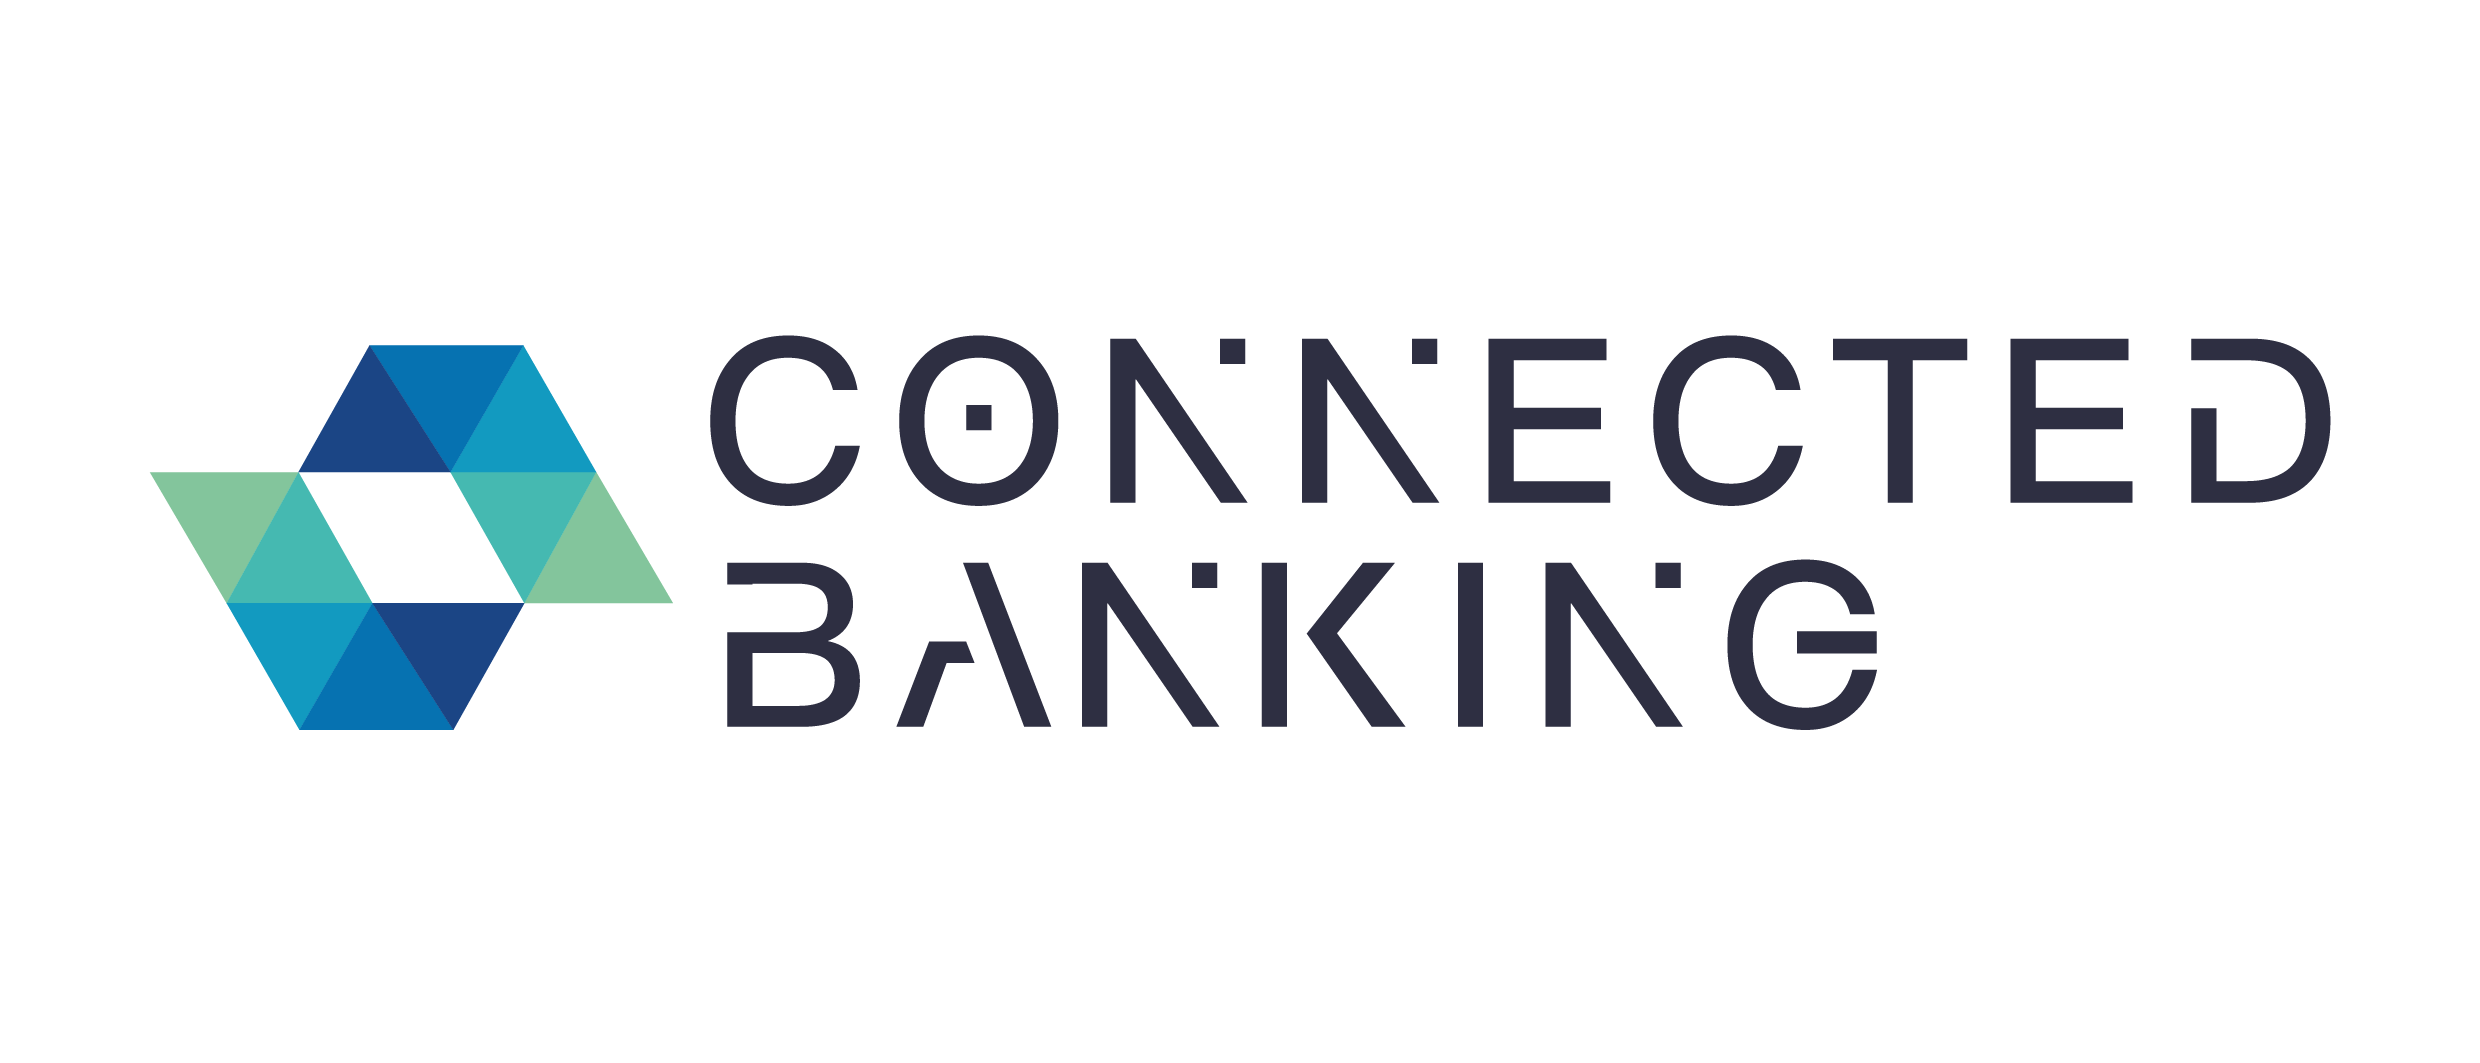 Connecting Banking